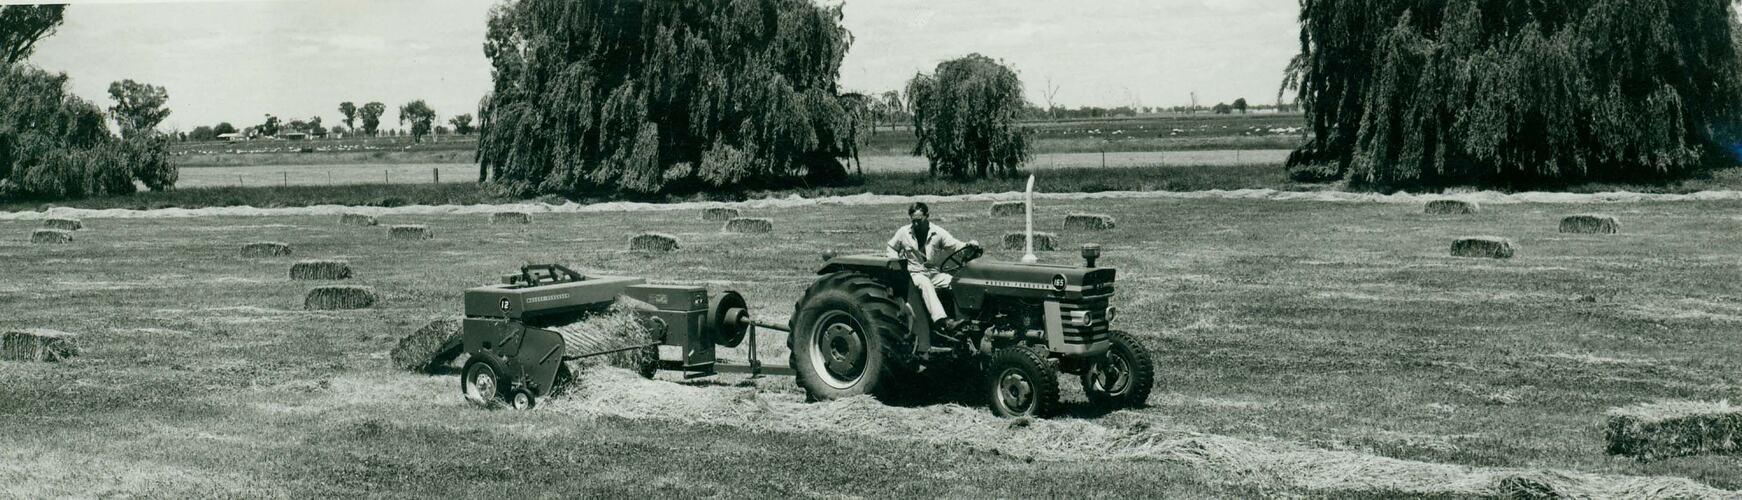 A man driving a tractor pulling a baler in a field with willow trees in background.